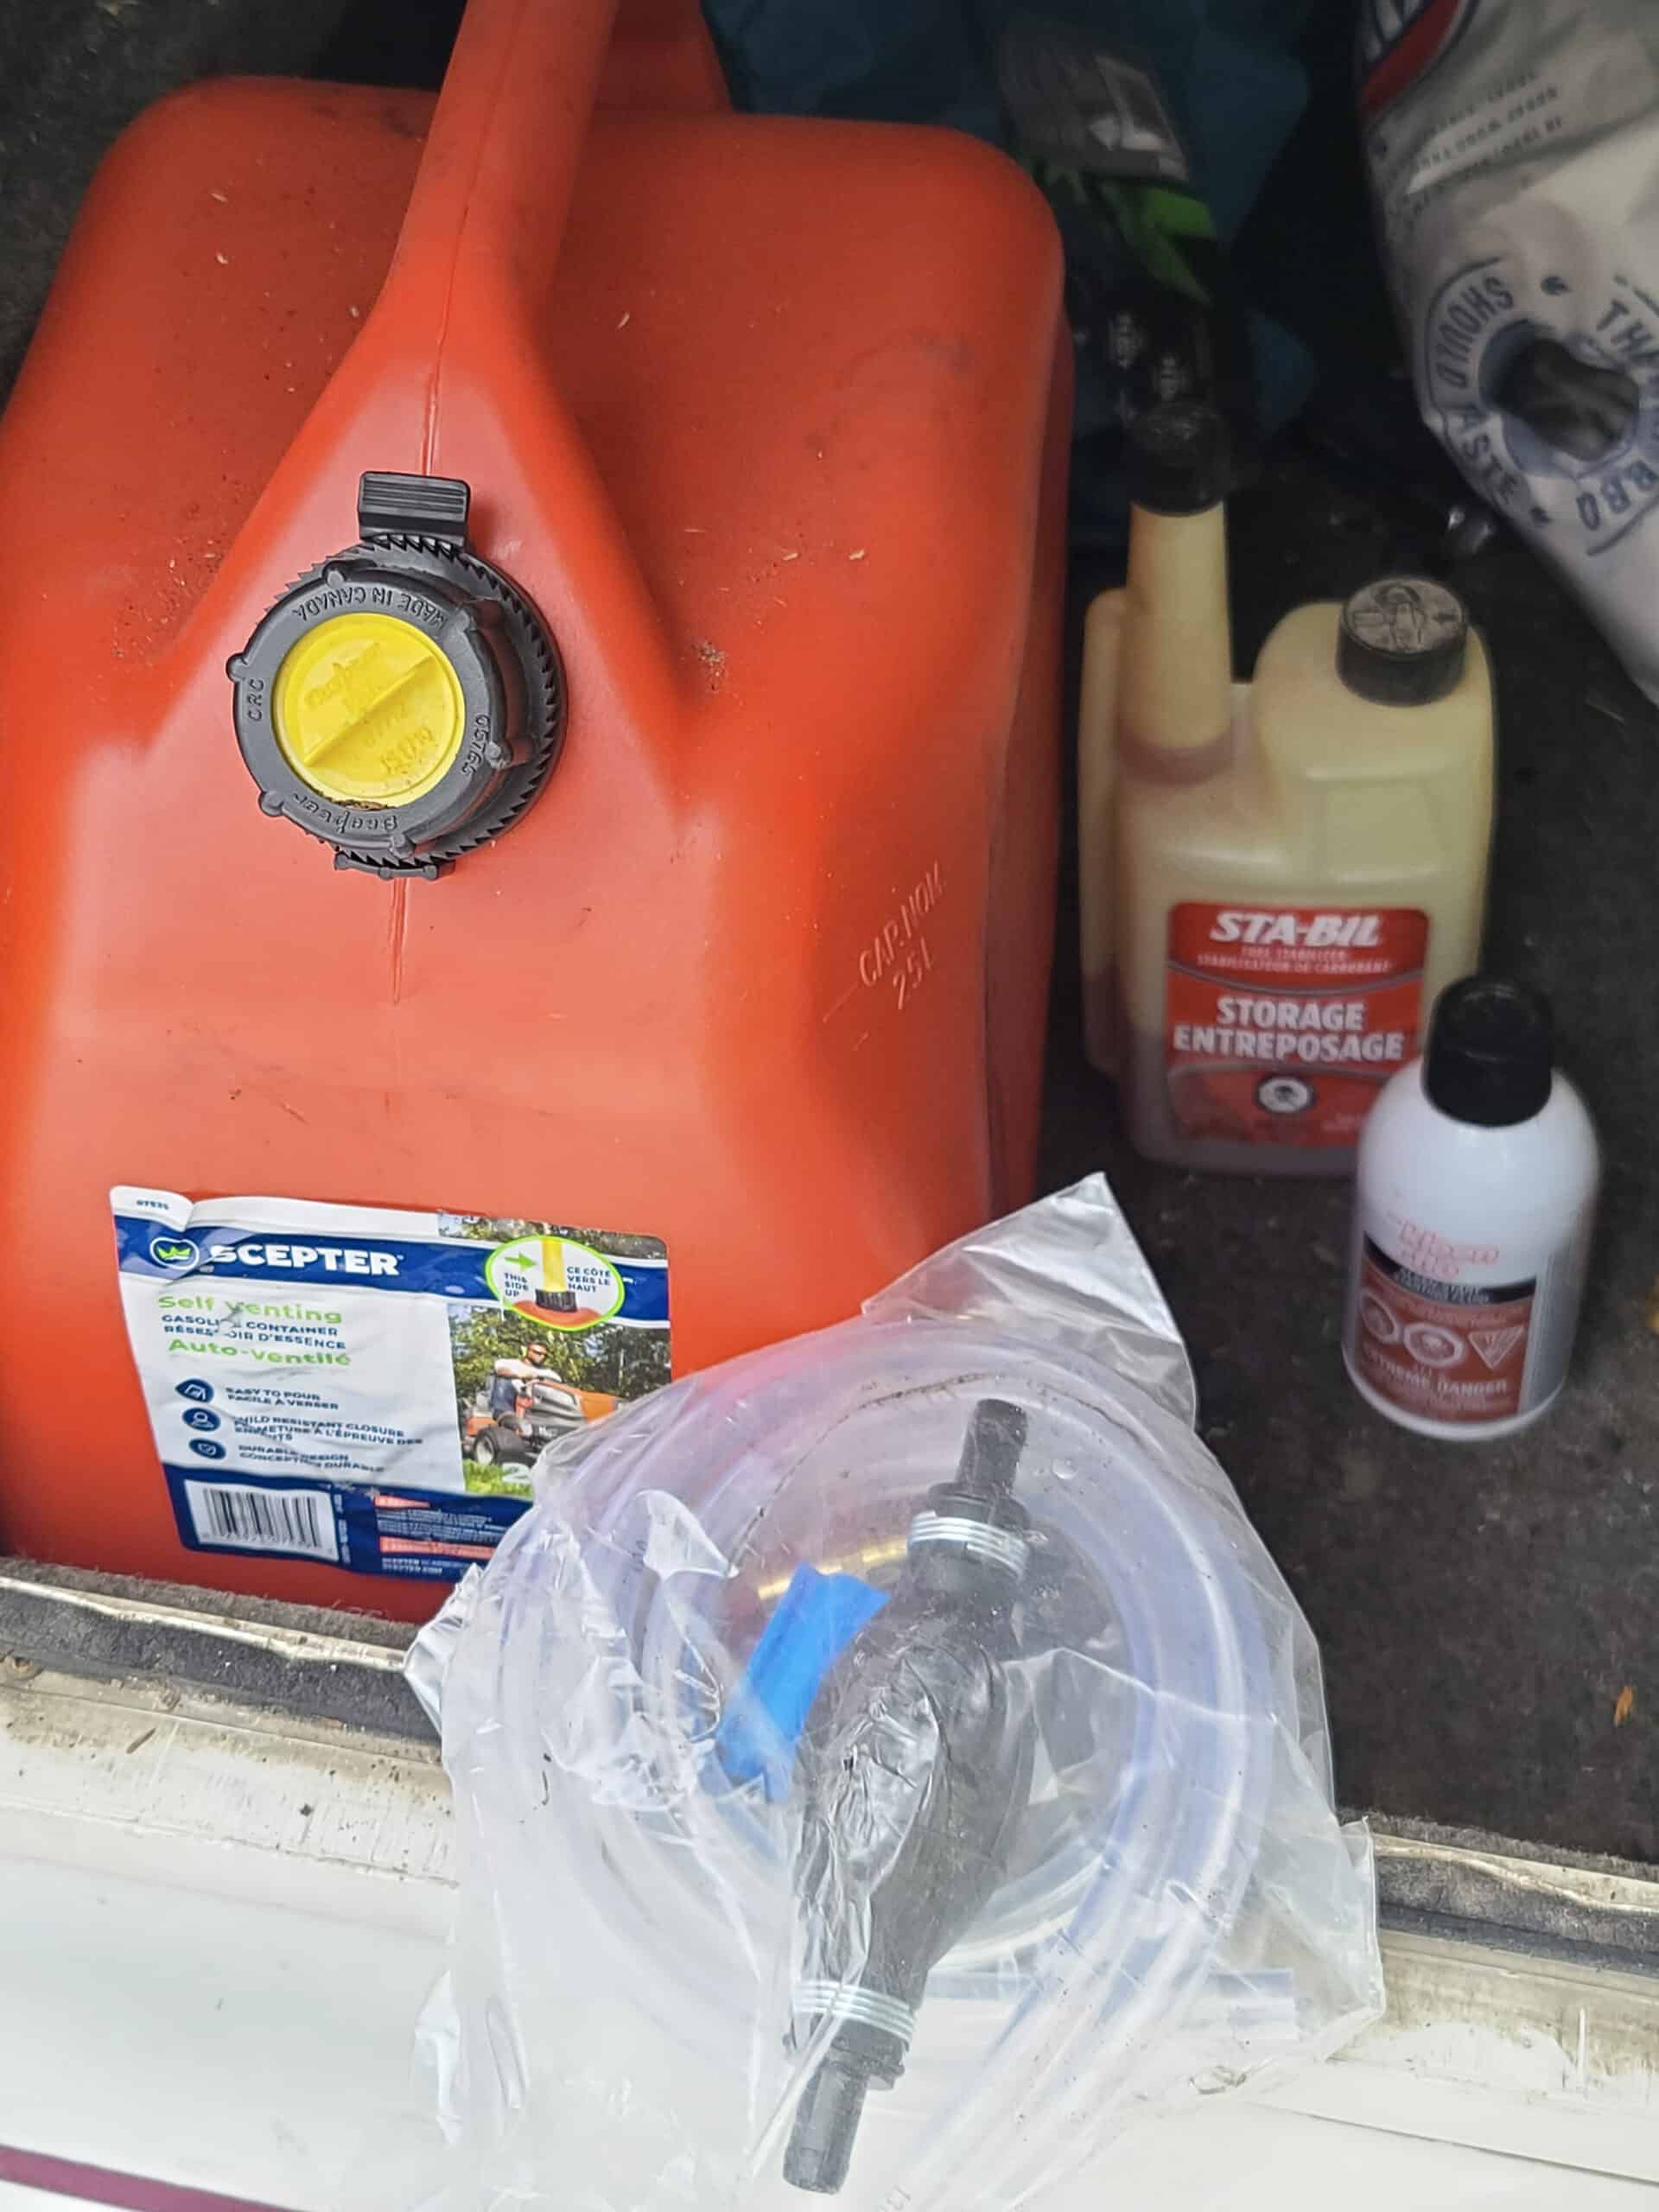 A red gas container, a bottle of Sta-bil, engine starter spray, and a gas siphon kit.